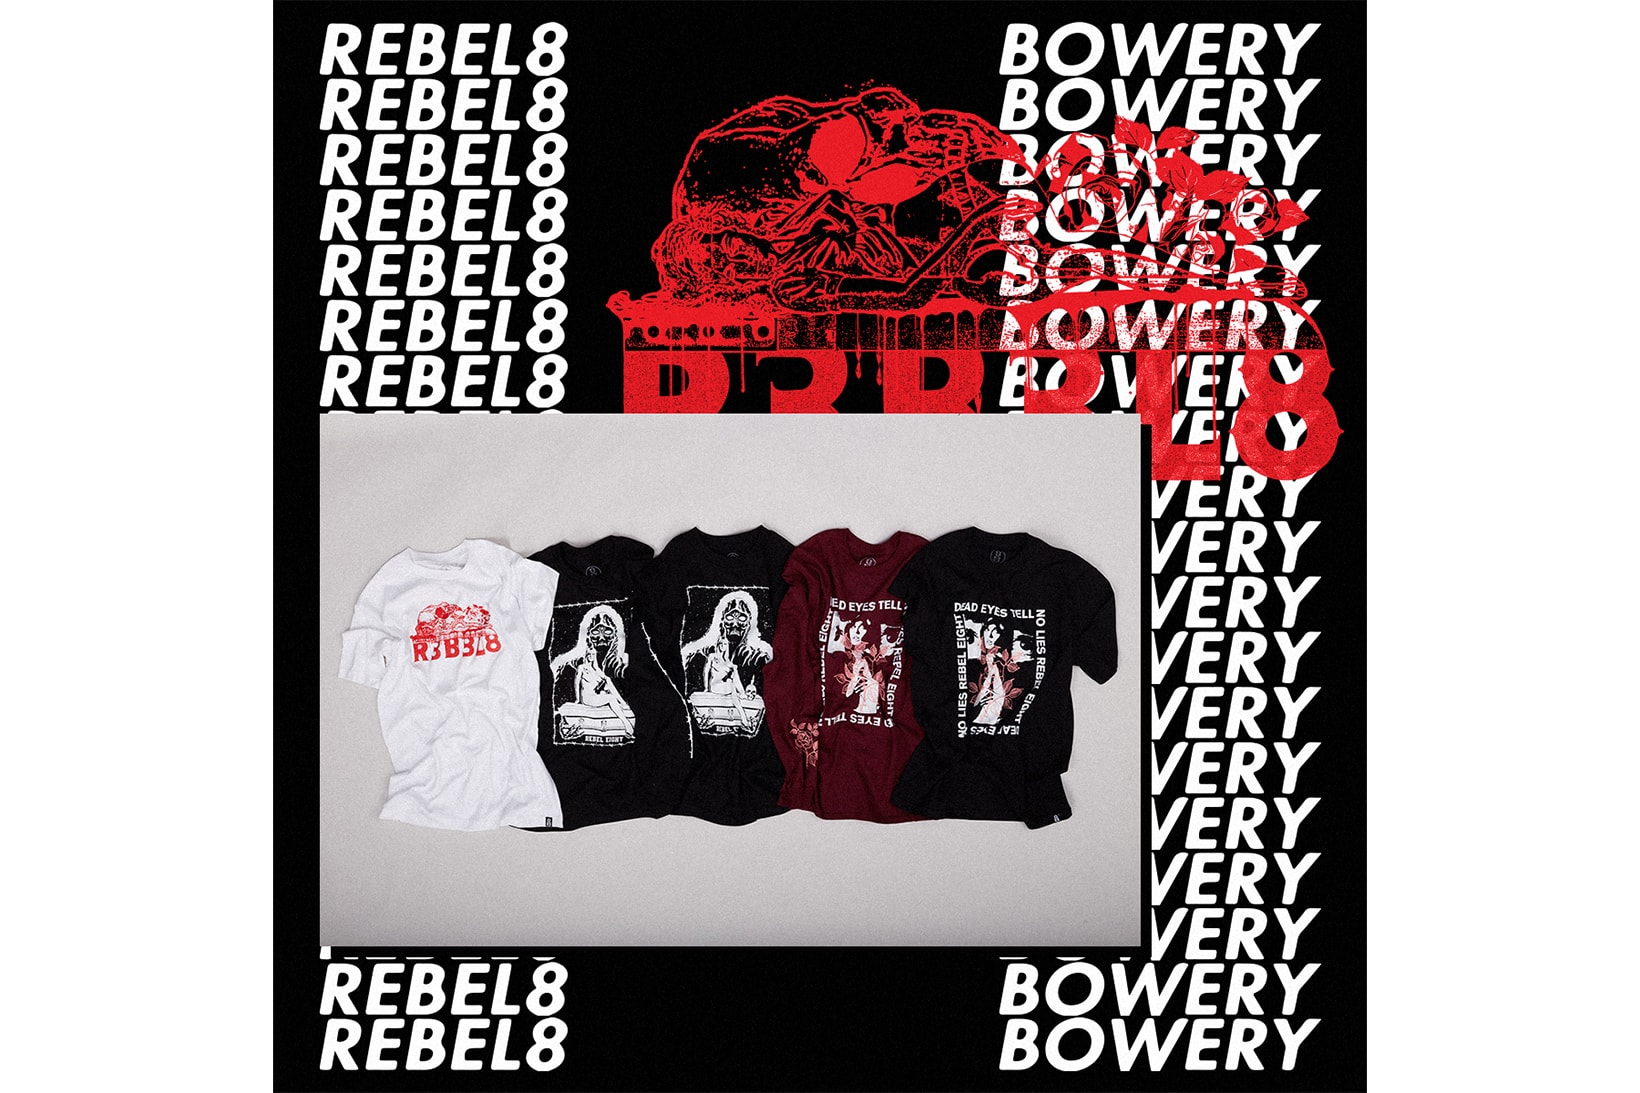 REBEL8 Bow3ry Fall Winter 2017 Capsule Collection Collaboration Release Date Info t-shirt hoodie jacket coat dead eyes tell no lies